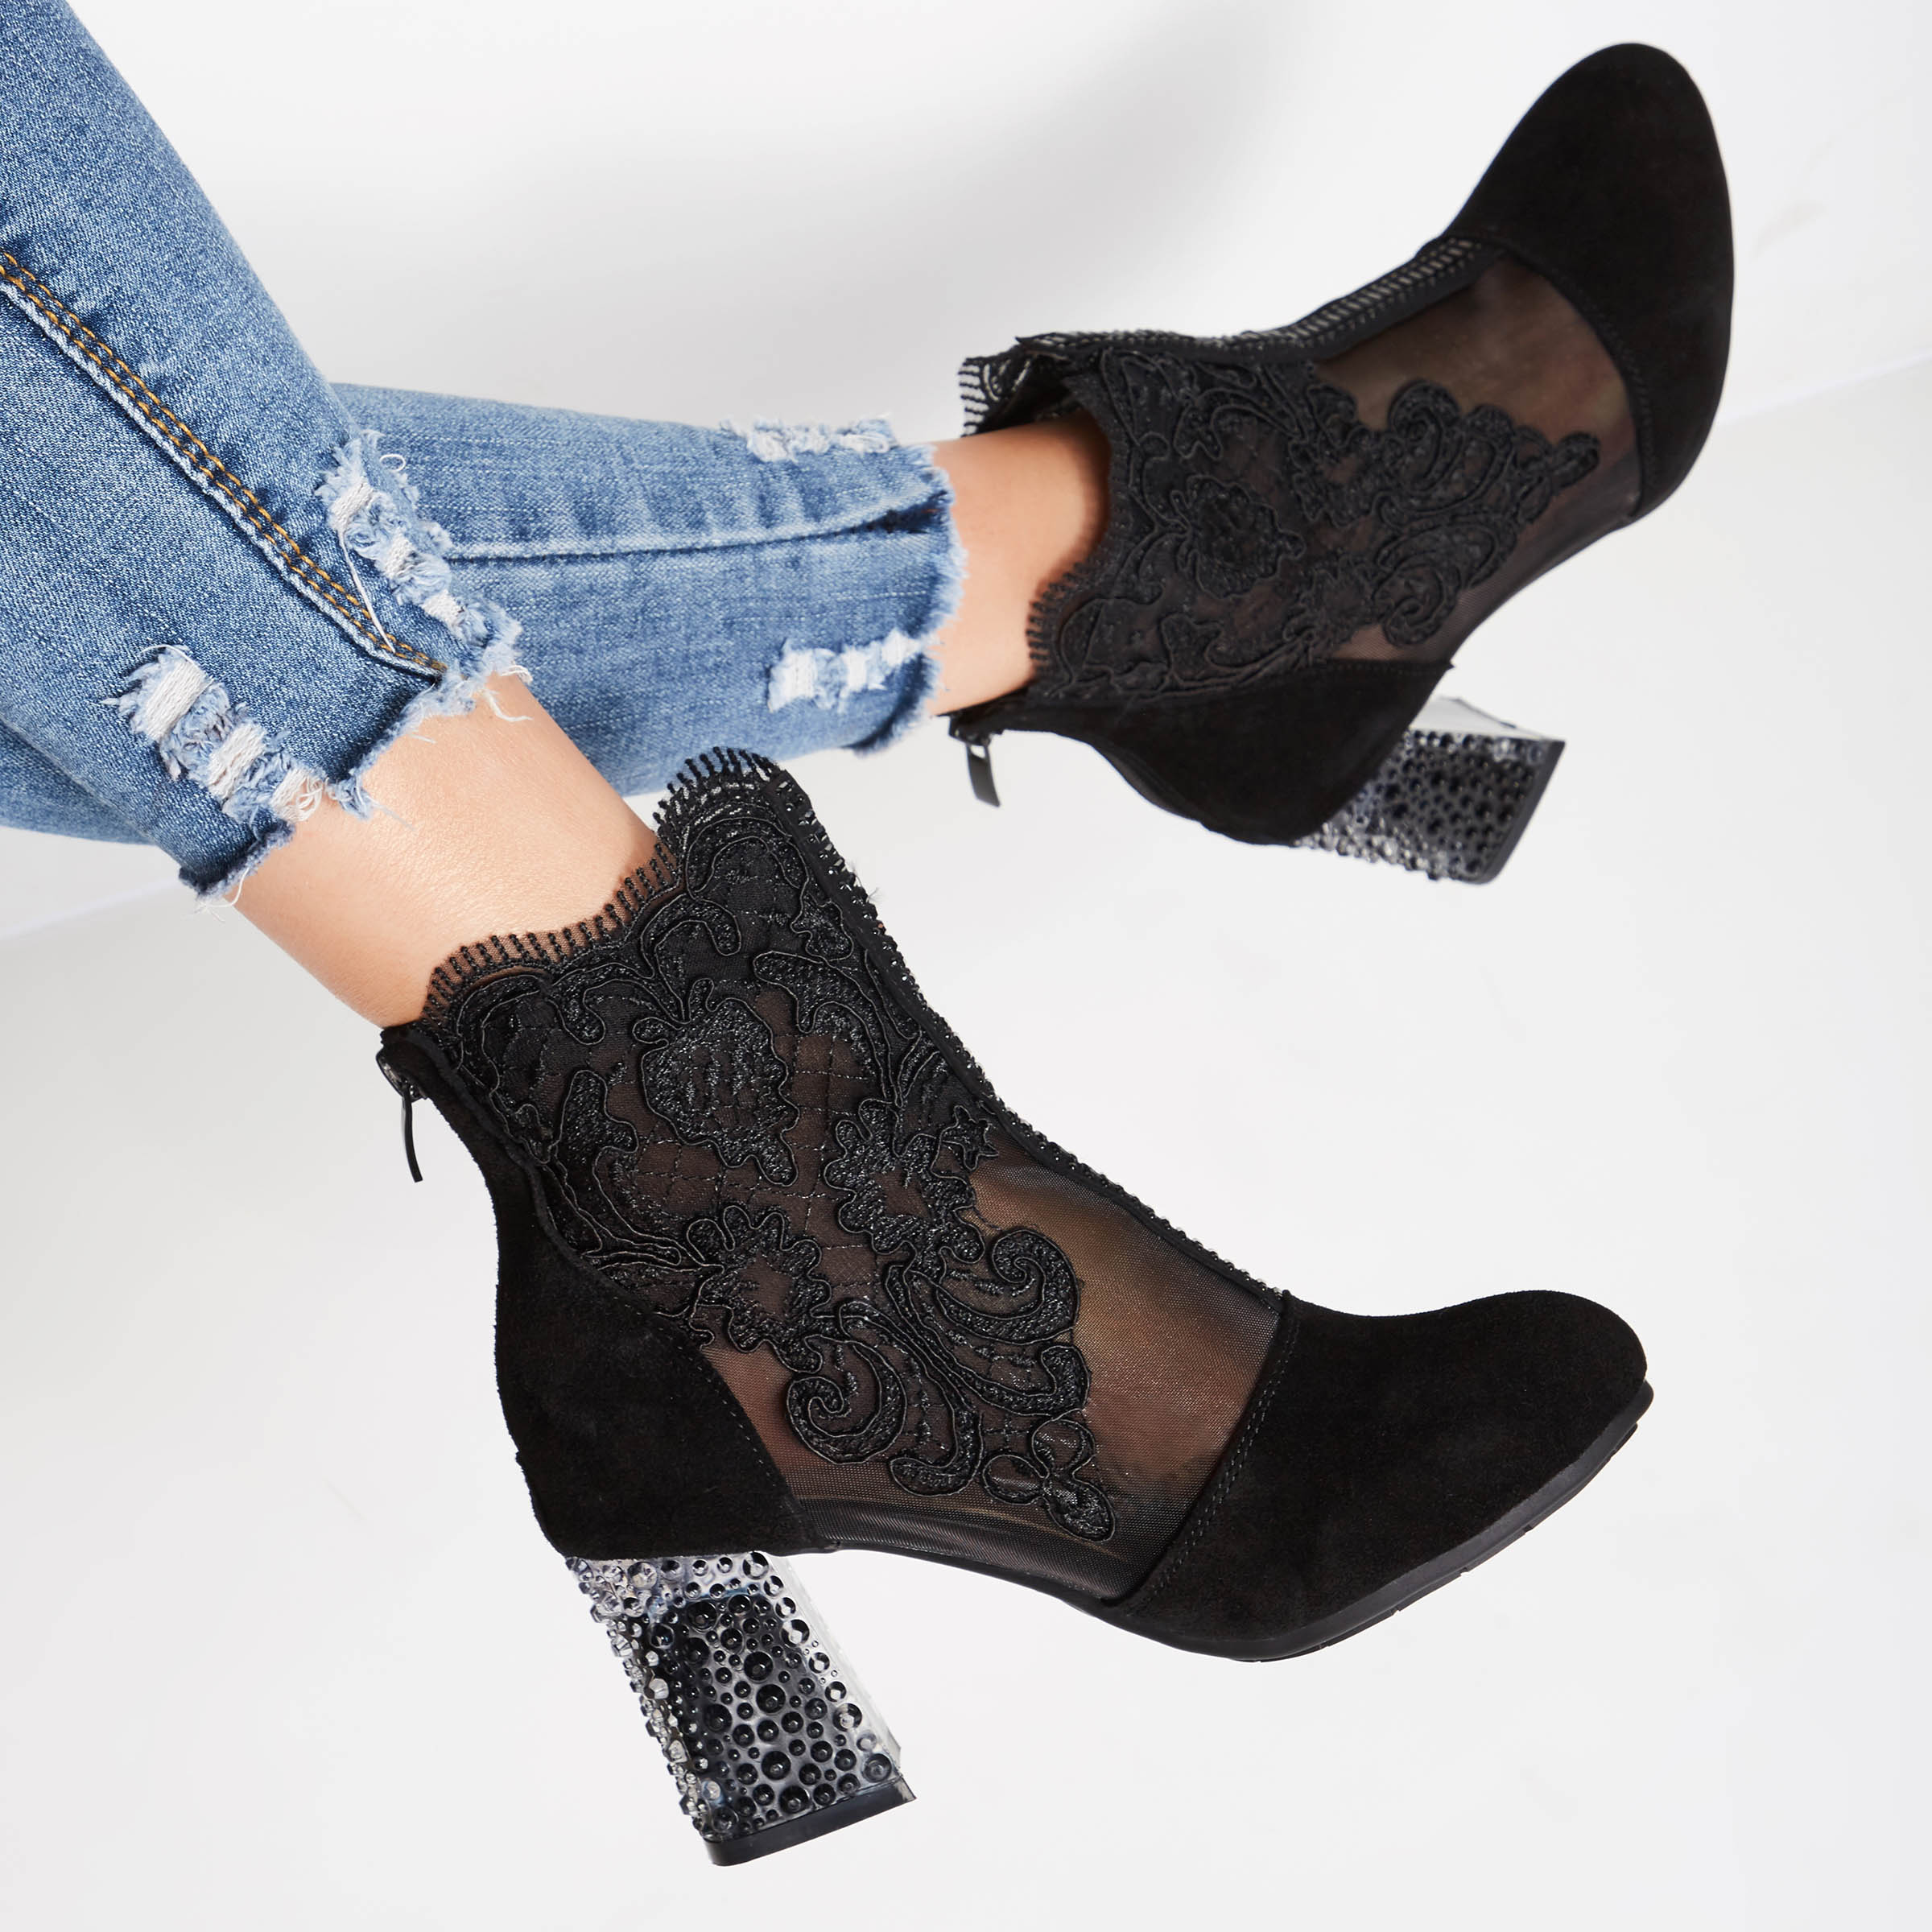 Floral Embroidery Lace Rhinestone Women's Black Ankle Boots